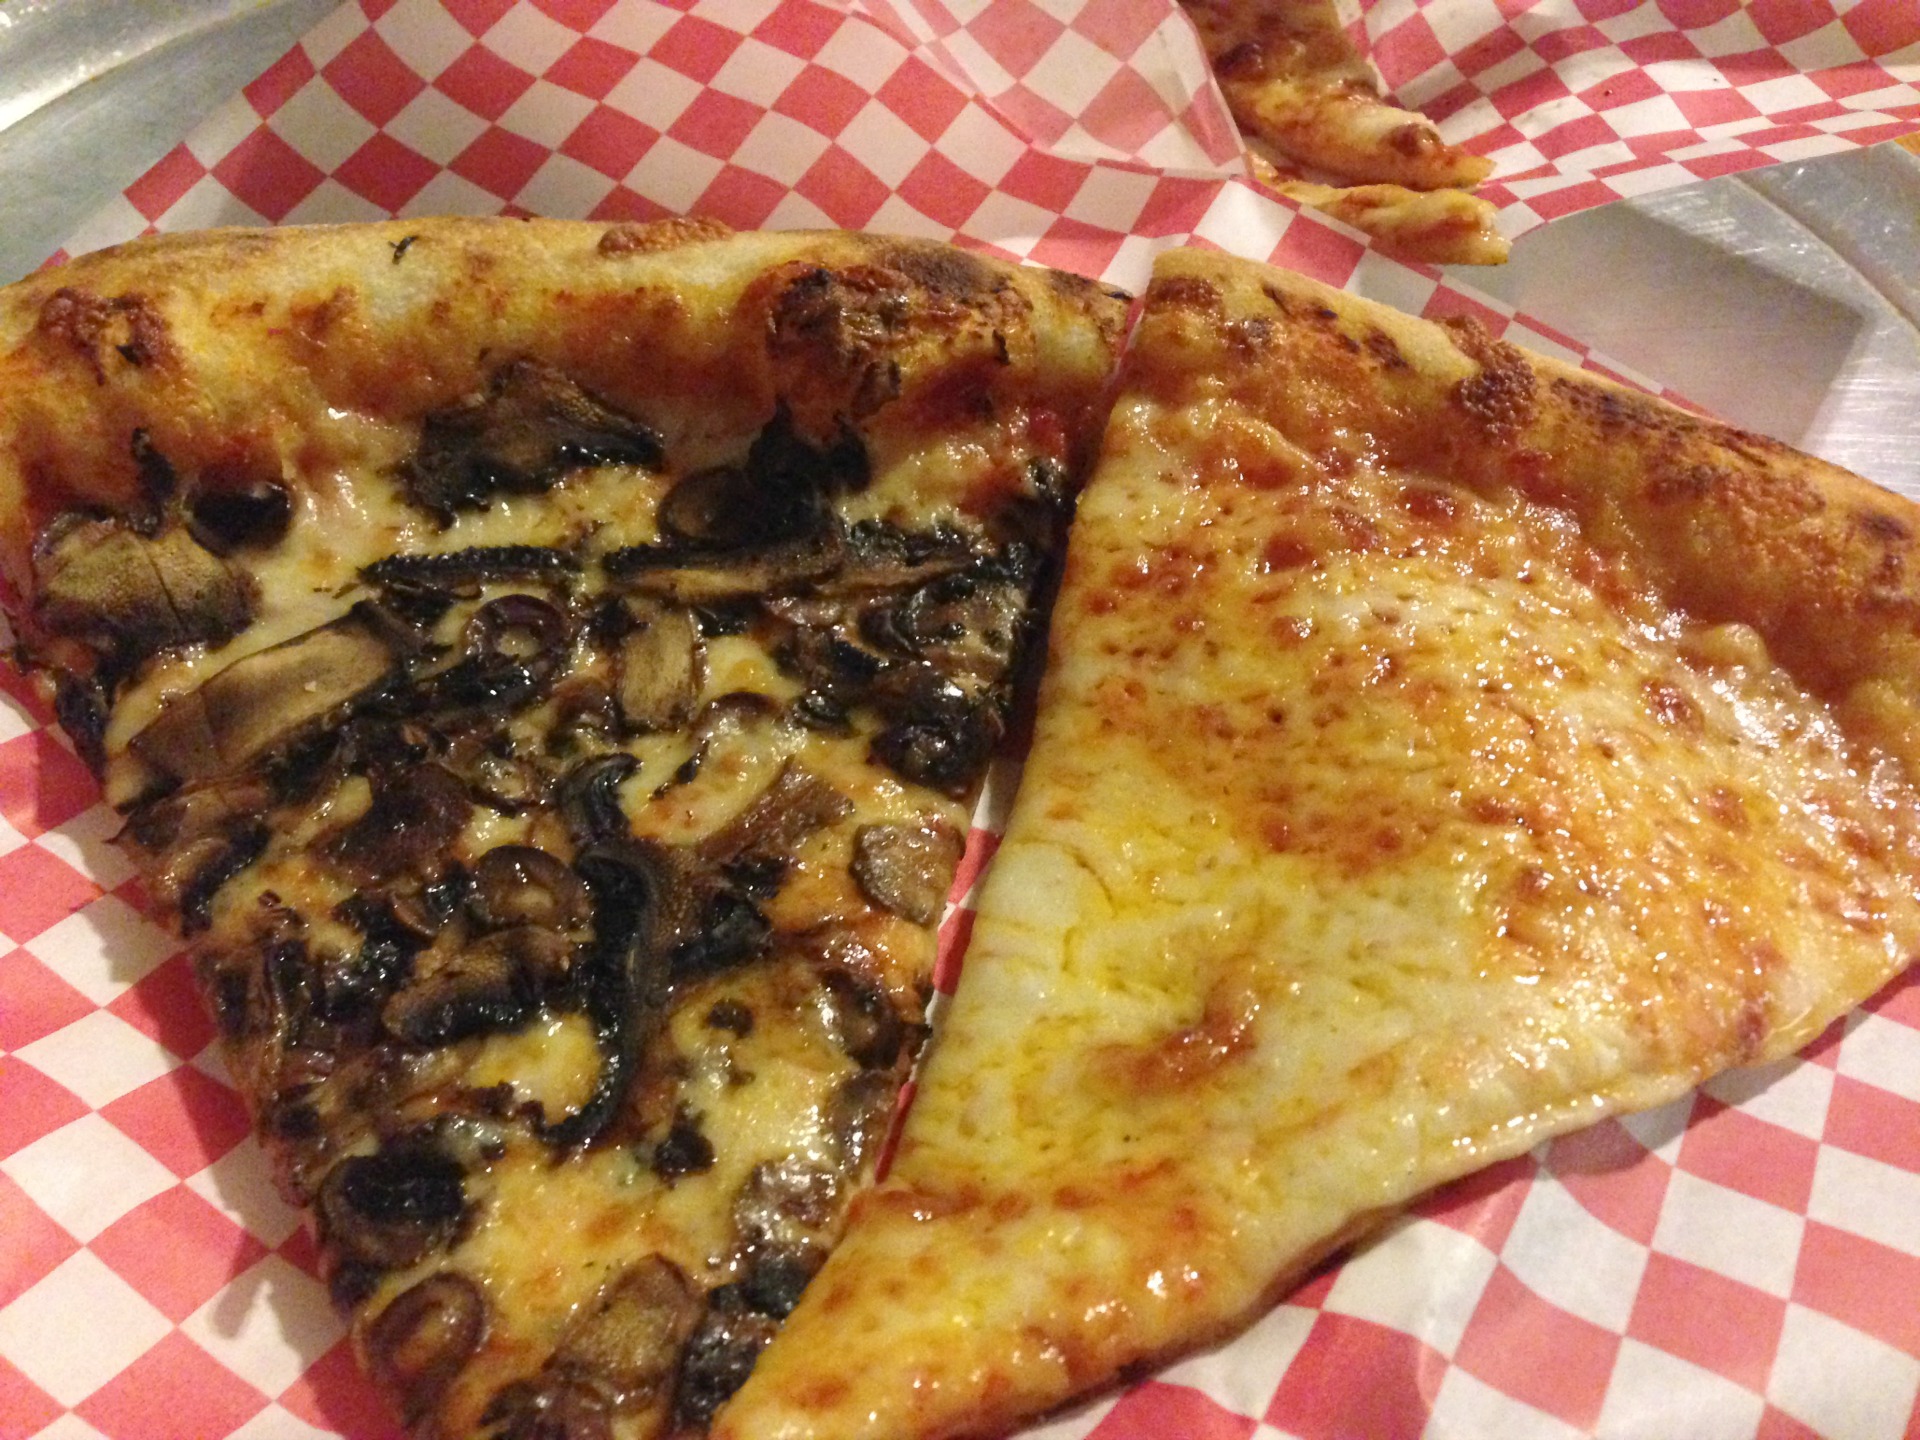 A slice of mushroom and olive and a slice of cheese from Oakland's Leaning Tower of Haddon Hill. 